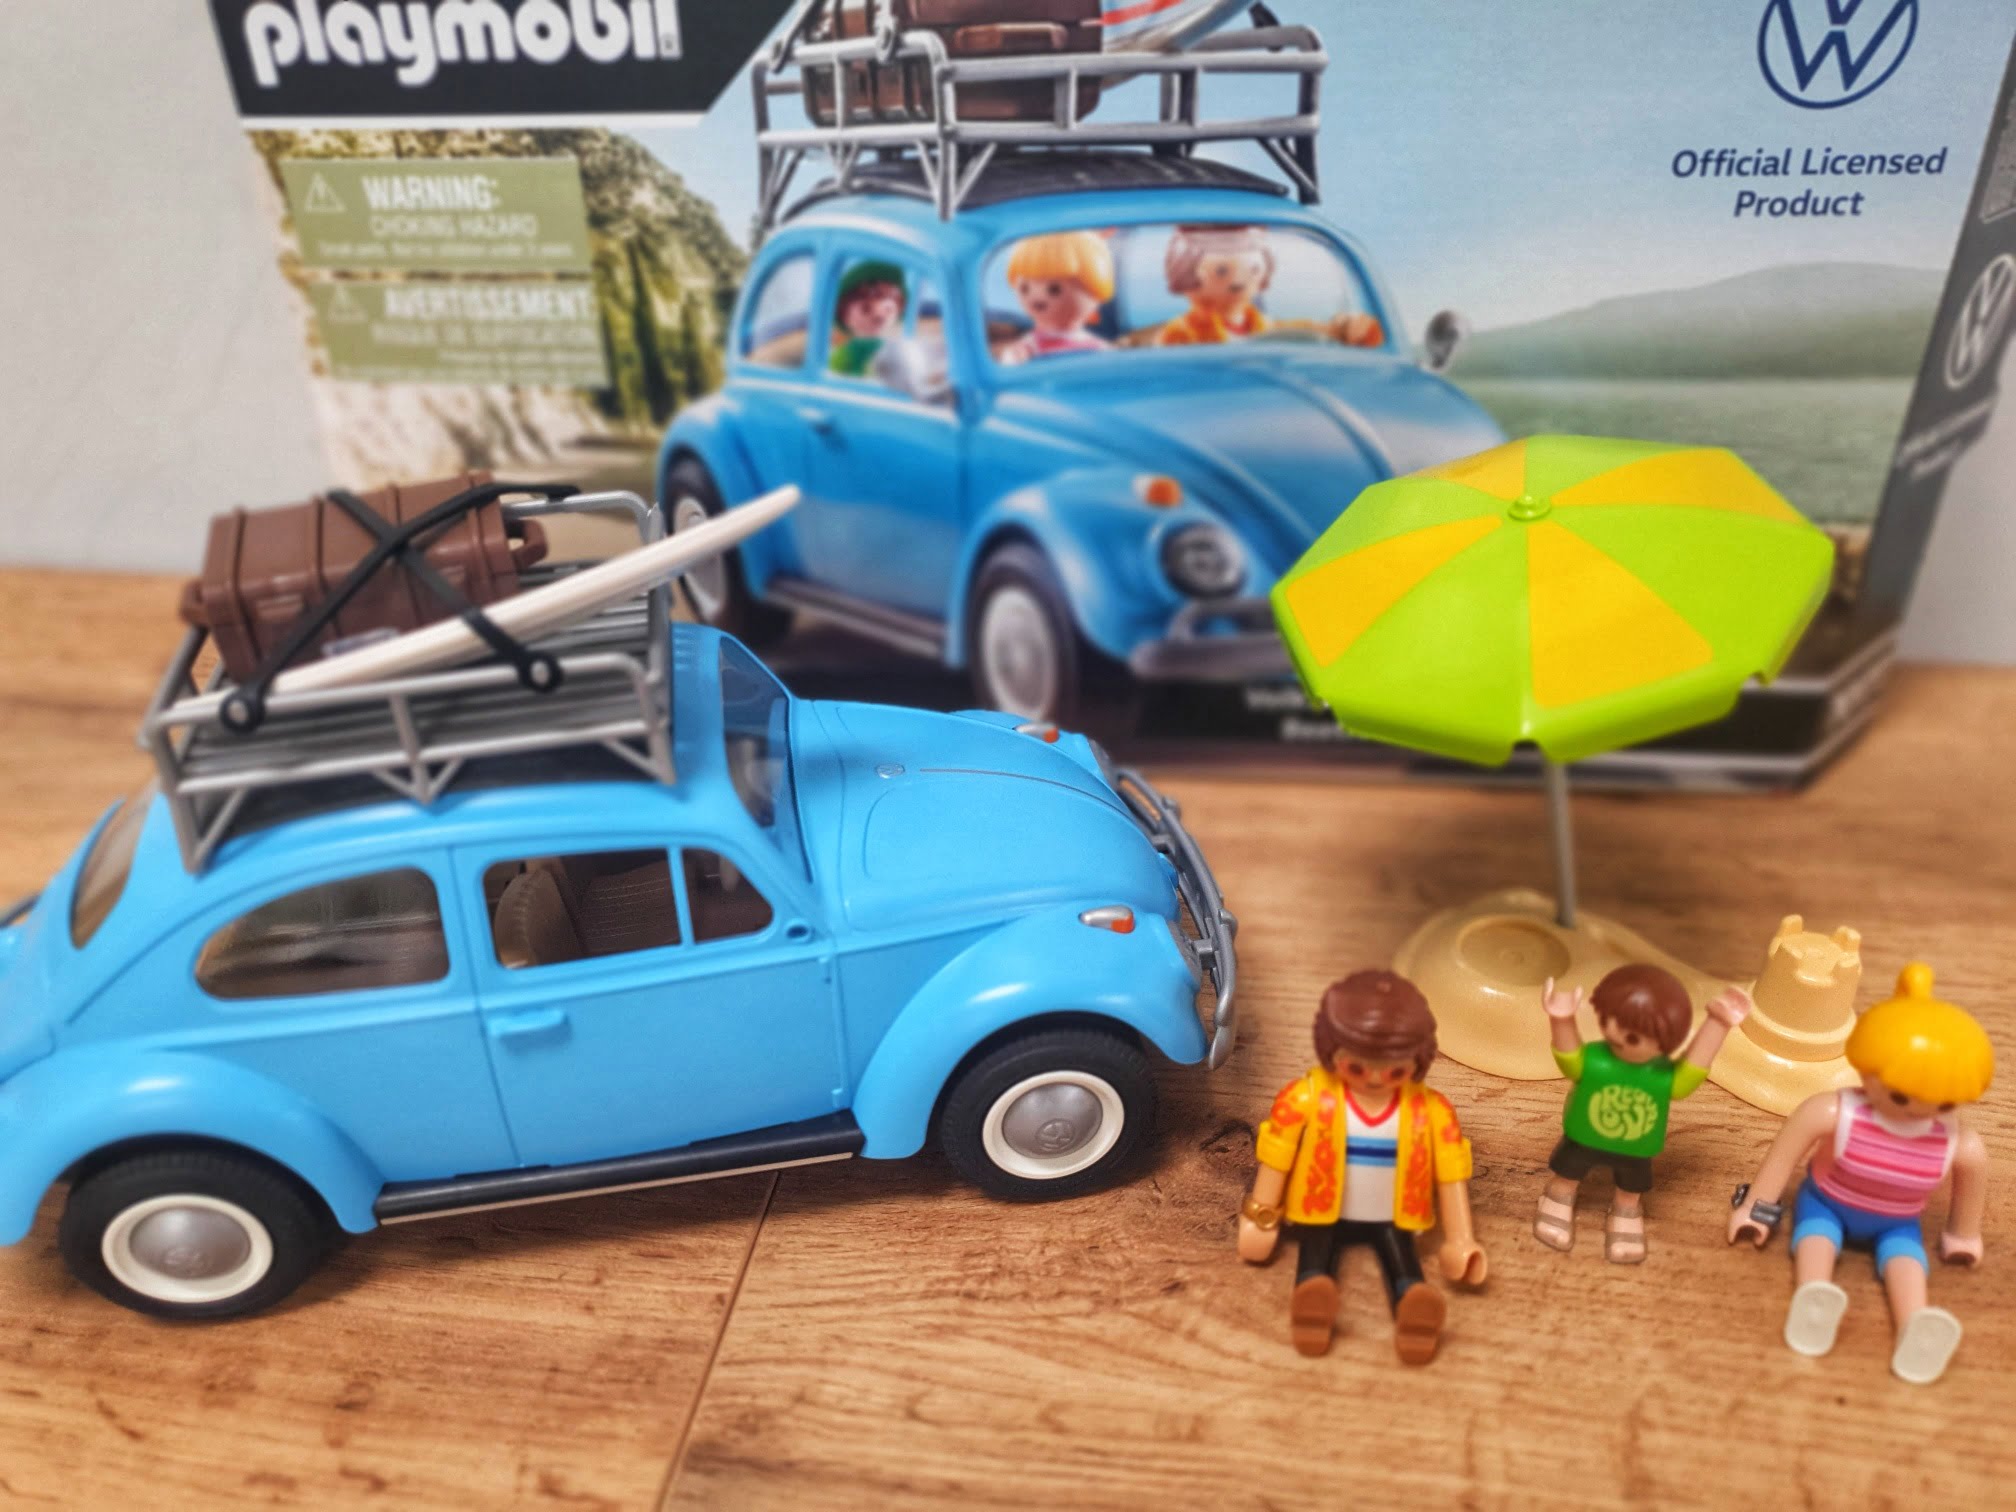 Playmobil Vw A Review Mummy Fever